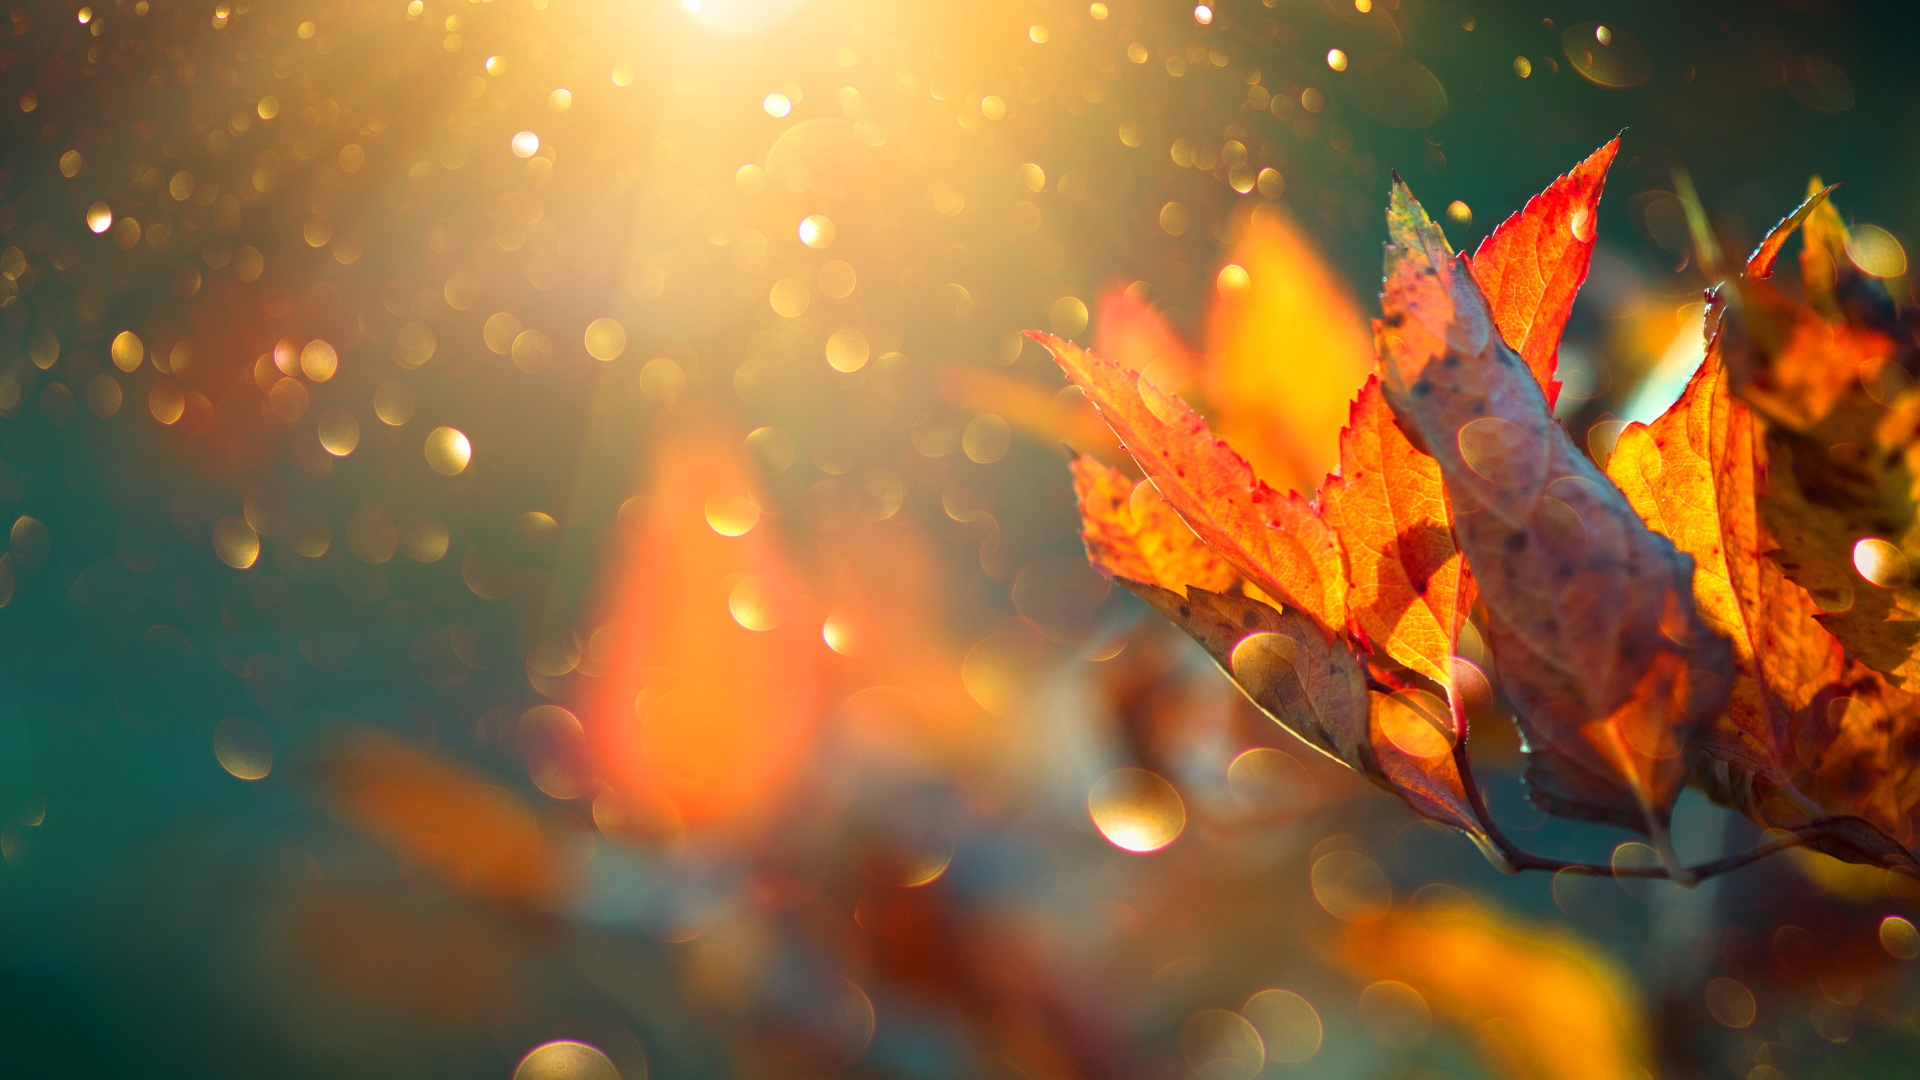 Fall leaves in bright sunlight